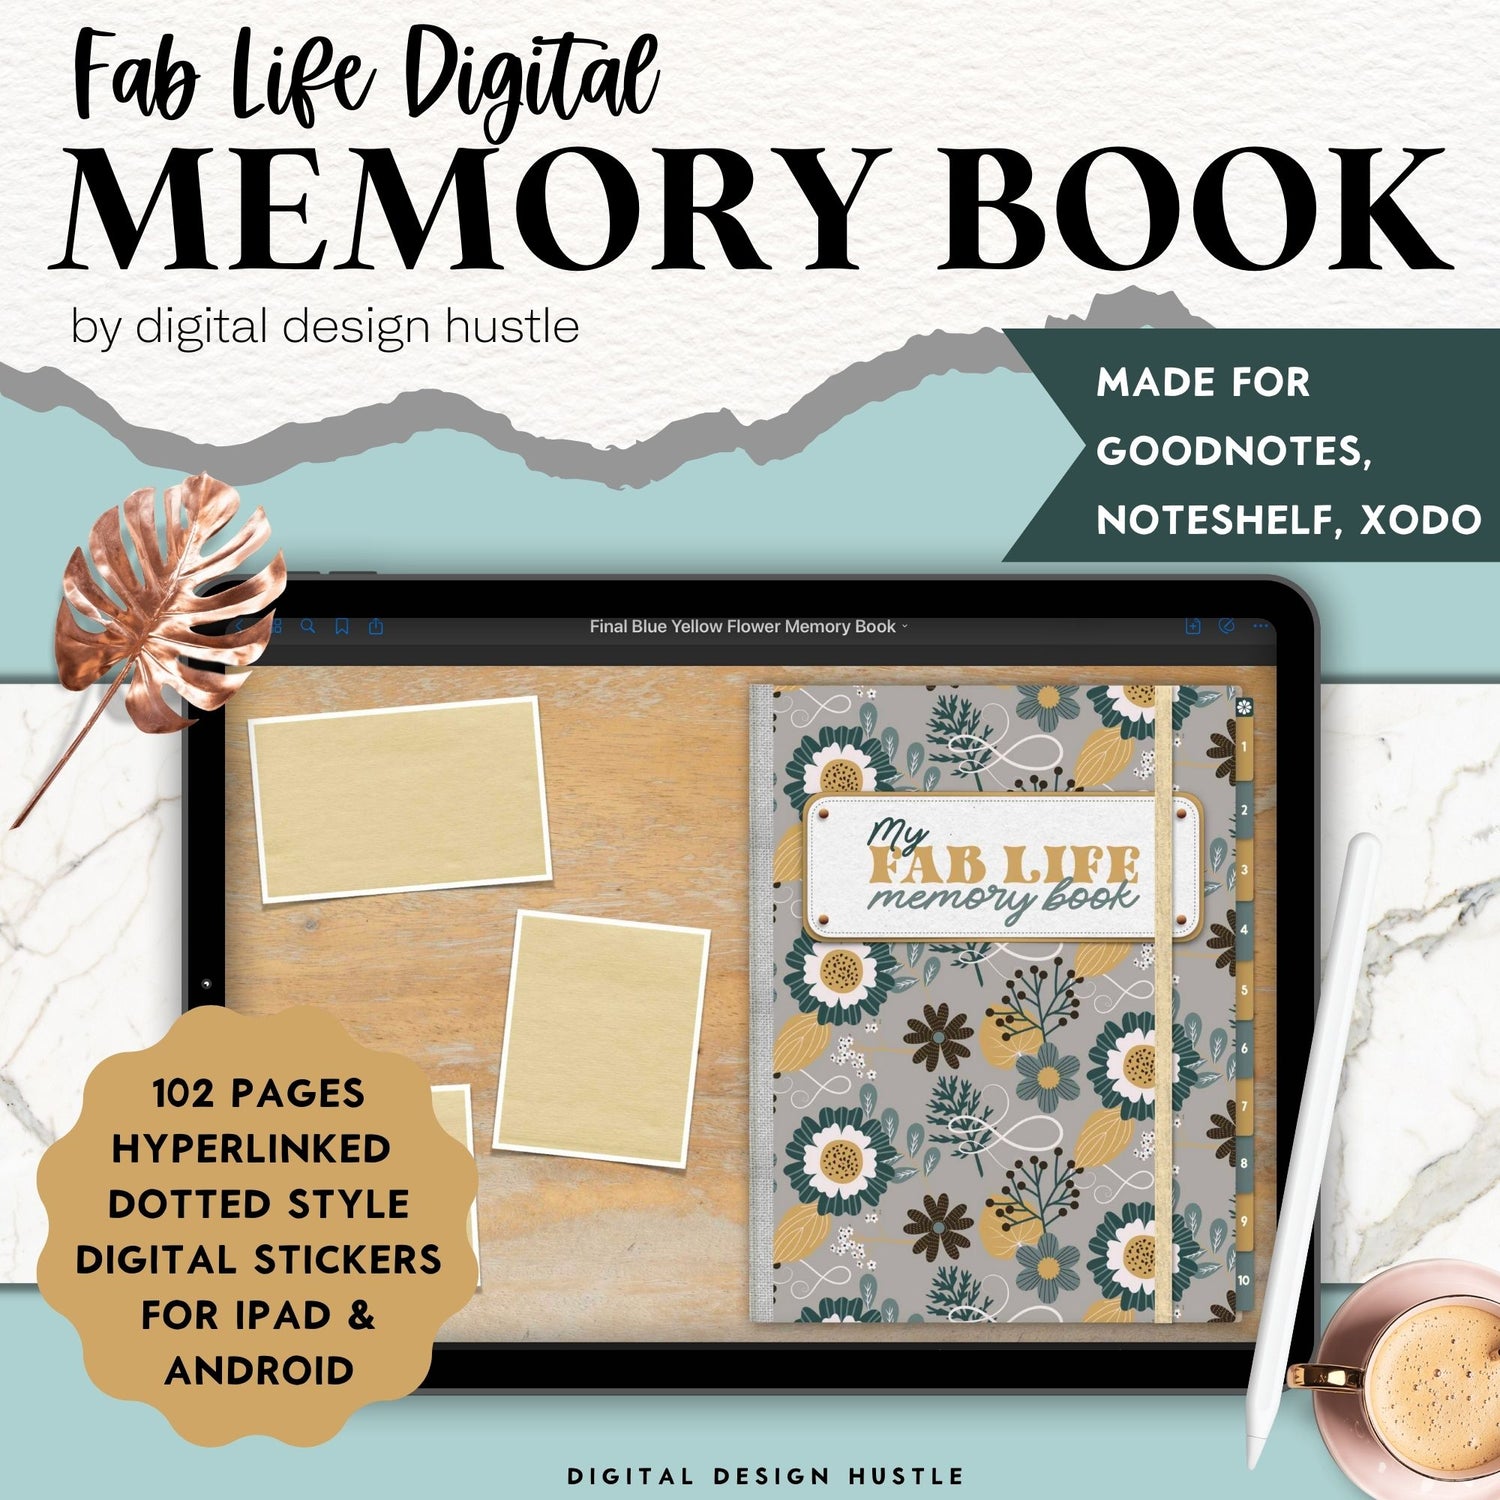 Record special family memories in the Digital Memory Book. Capture all your special memories with family and friends in the 102-page digital journal. This is the perfect digital scrapbook to document family holidays.